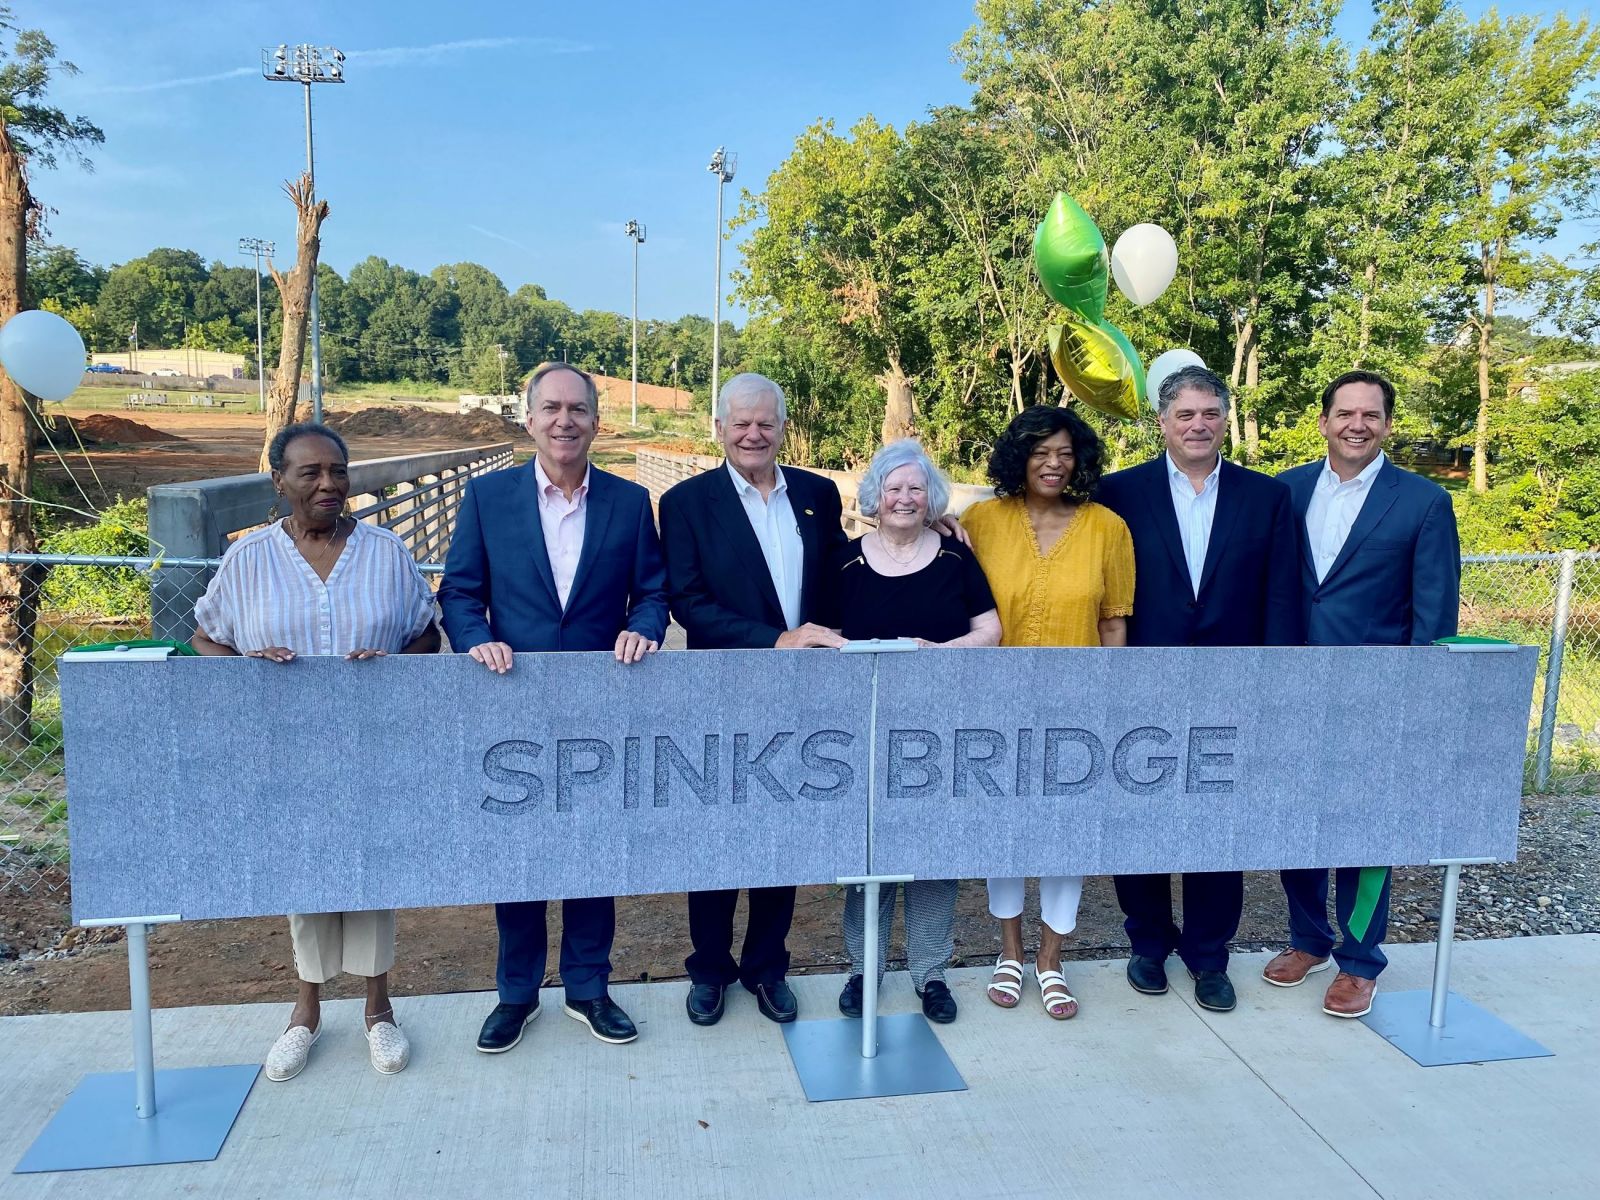 The Spinks Family Foundation helped finance a 110-foot pedestrian bridge installed in Unity Park earlier this month. (Photo/Provided)